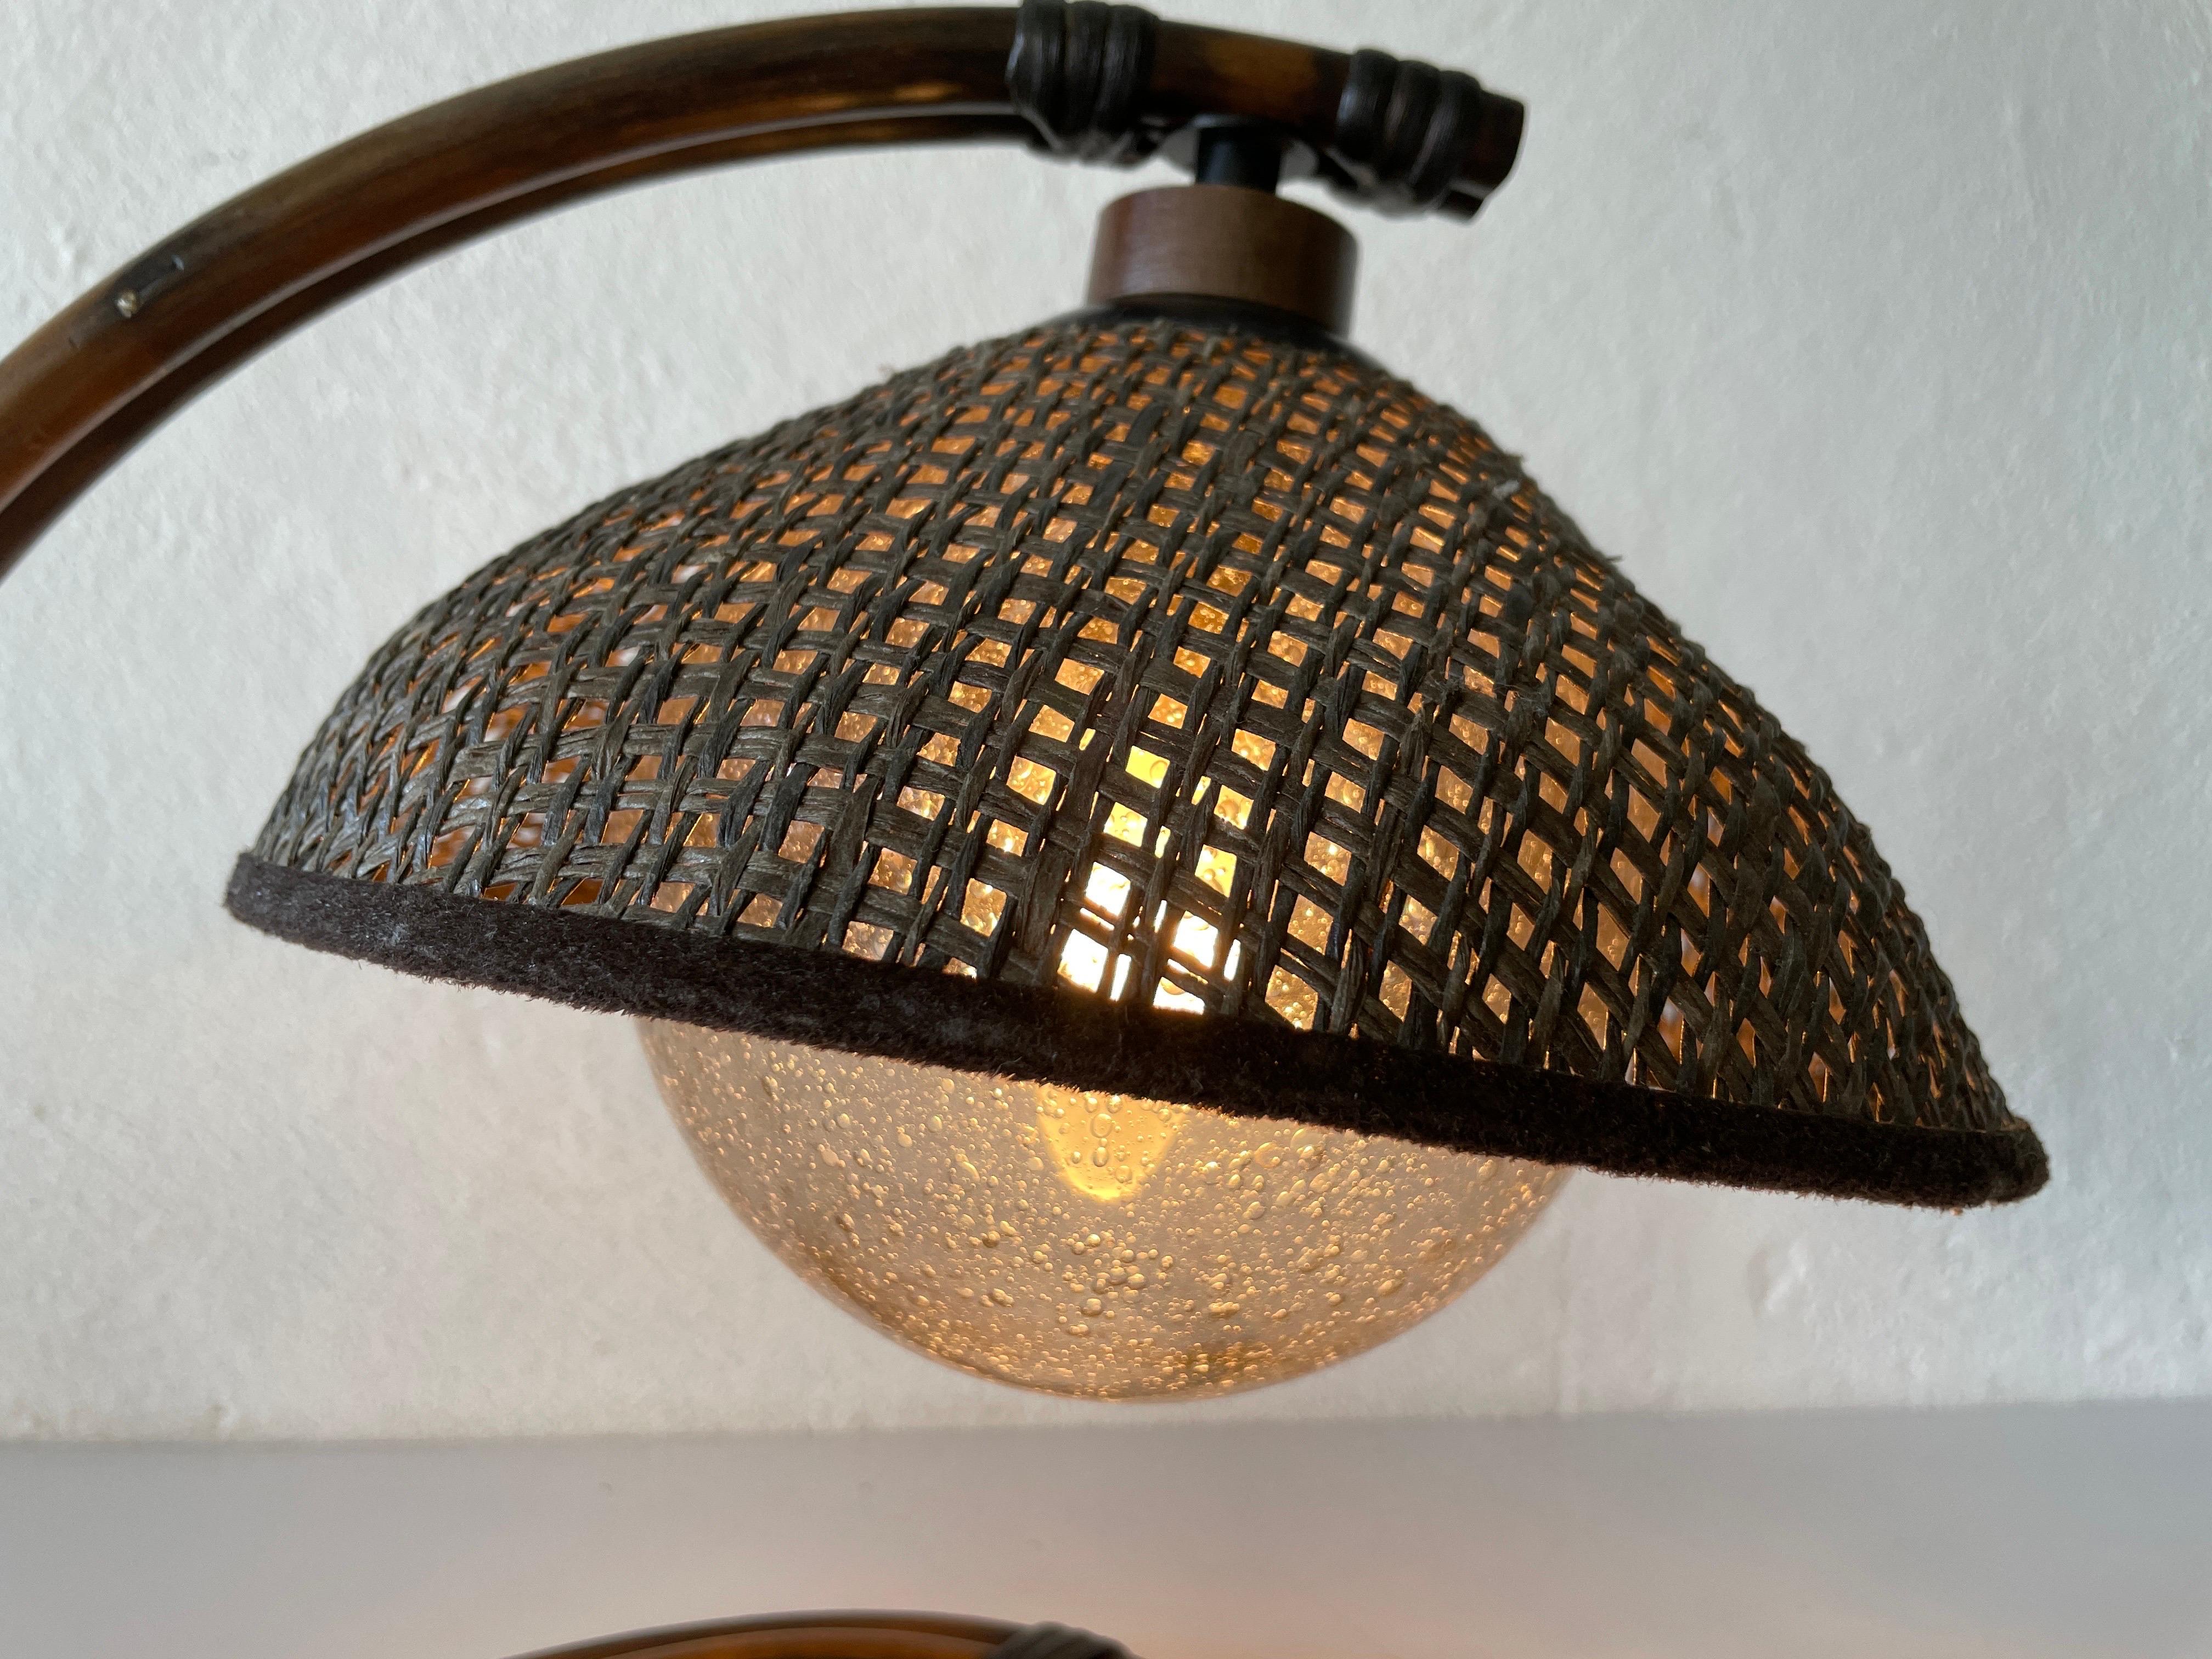 Rare Bamboo & Wicker Bedside Lamp Air Bubble Glass by Temde, 1960s, Switzerland For Sale 6